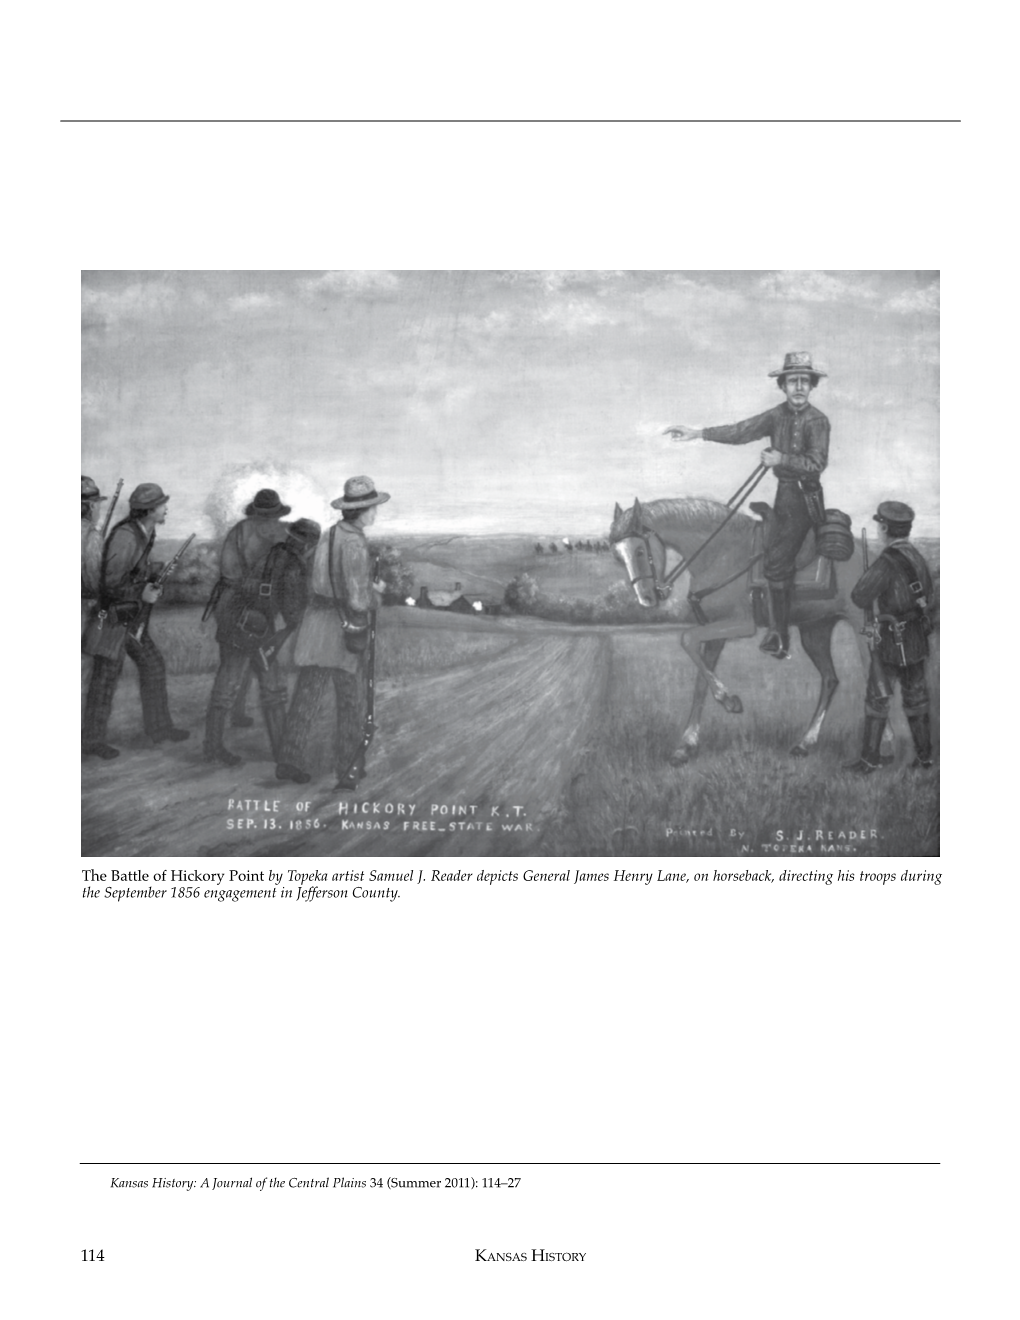 The Battle of Hickory Point by Topeka Artist Samuel J. Reader Depicts